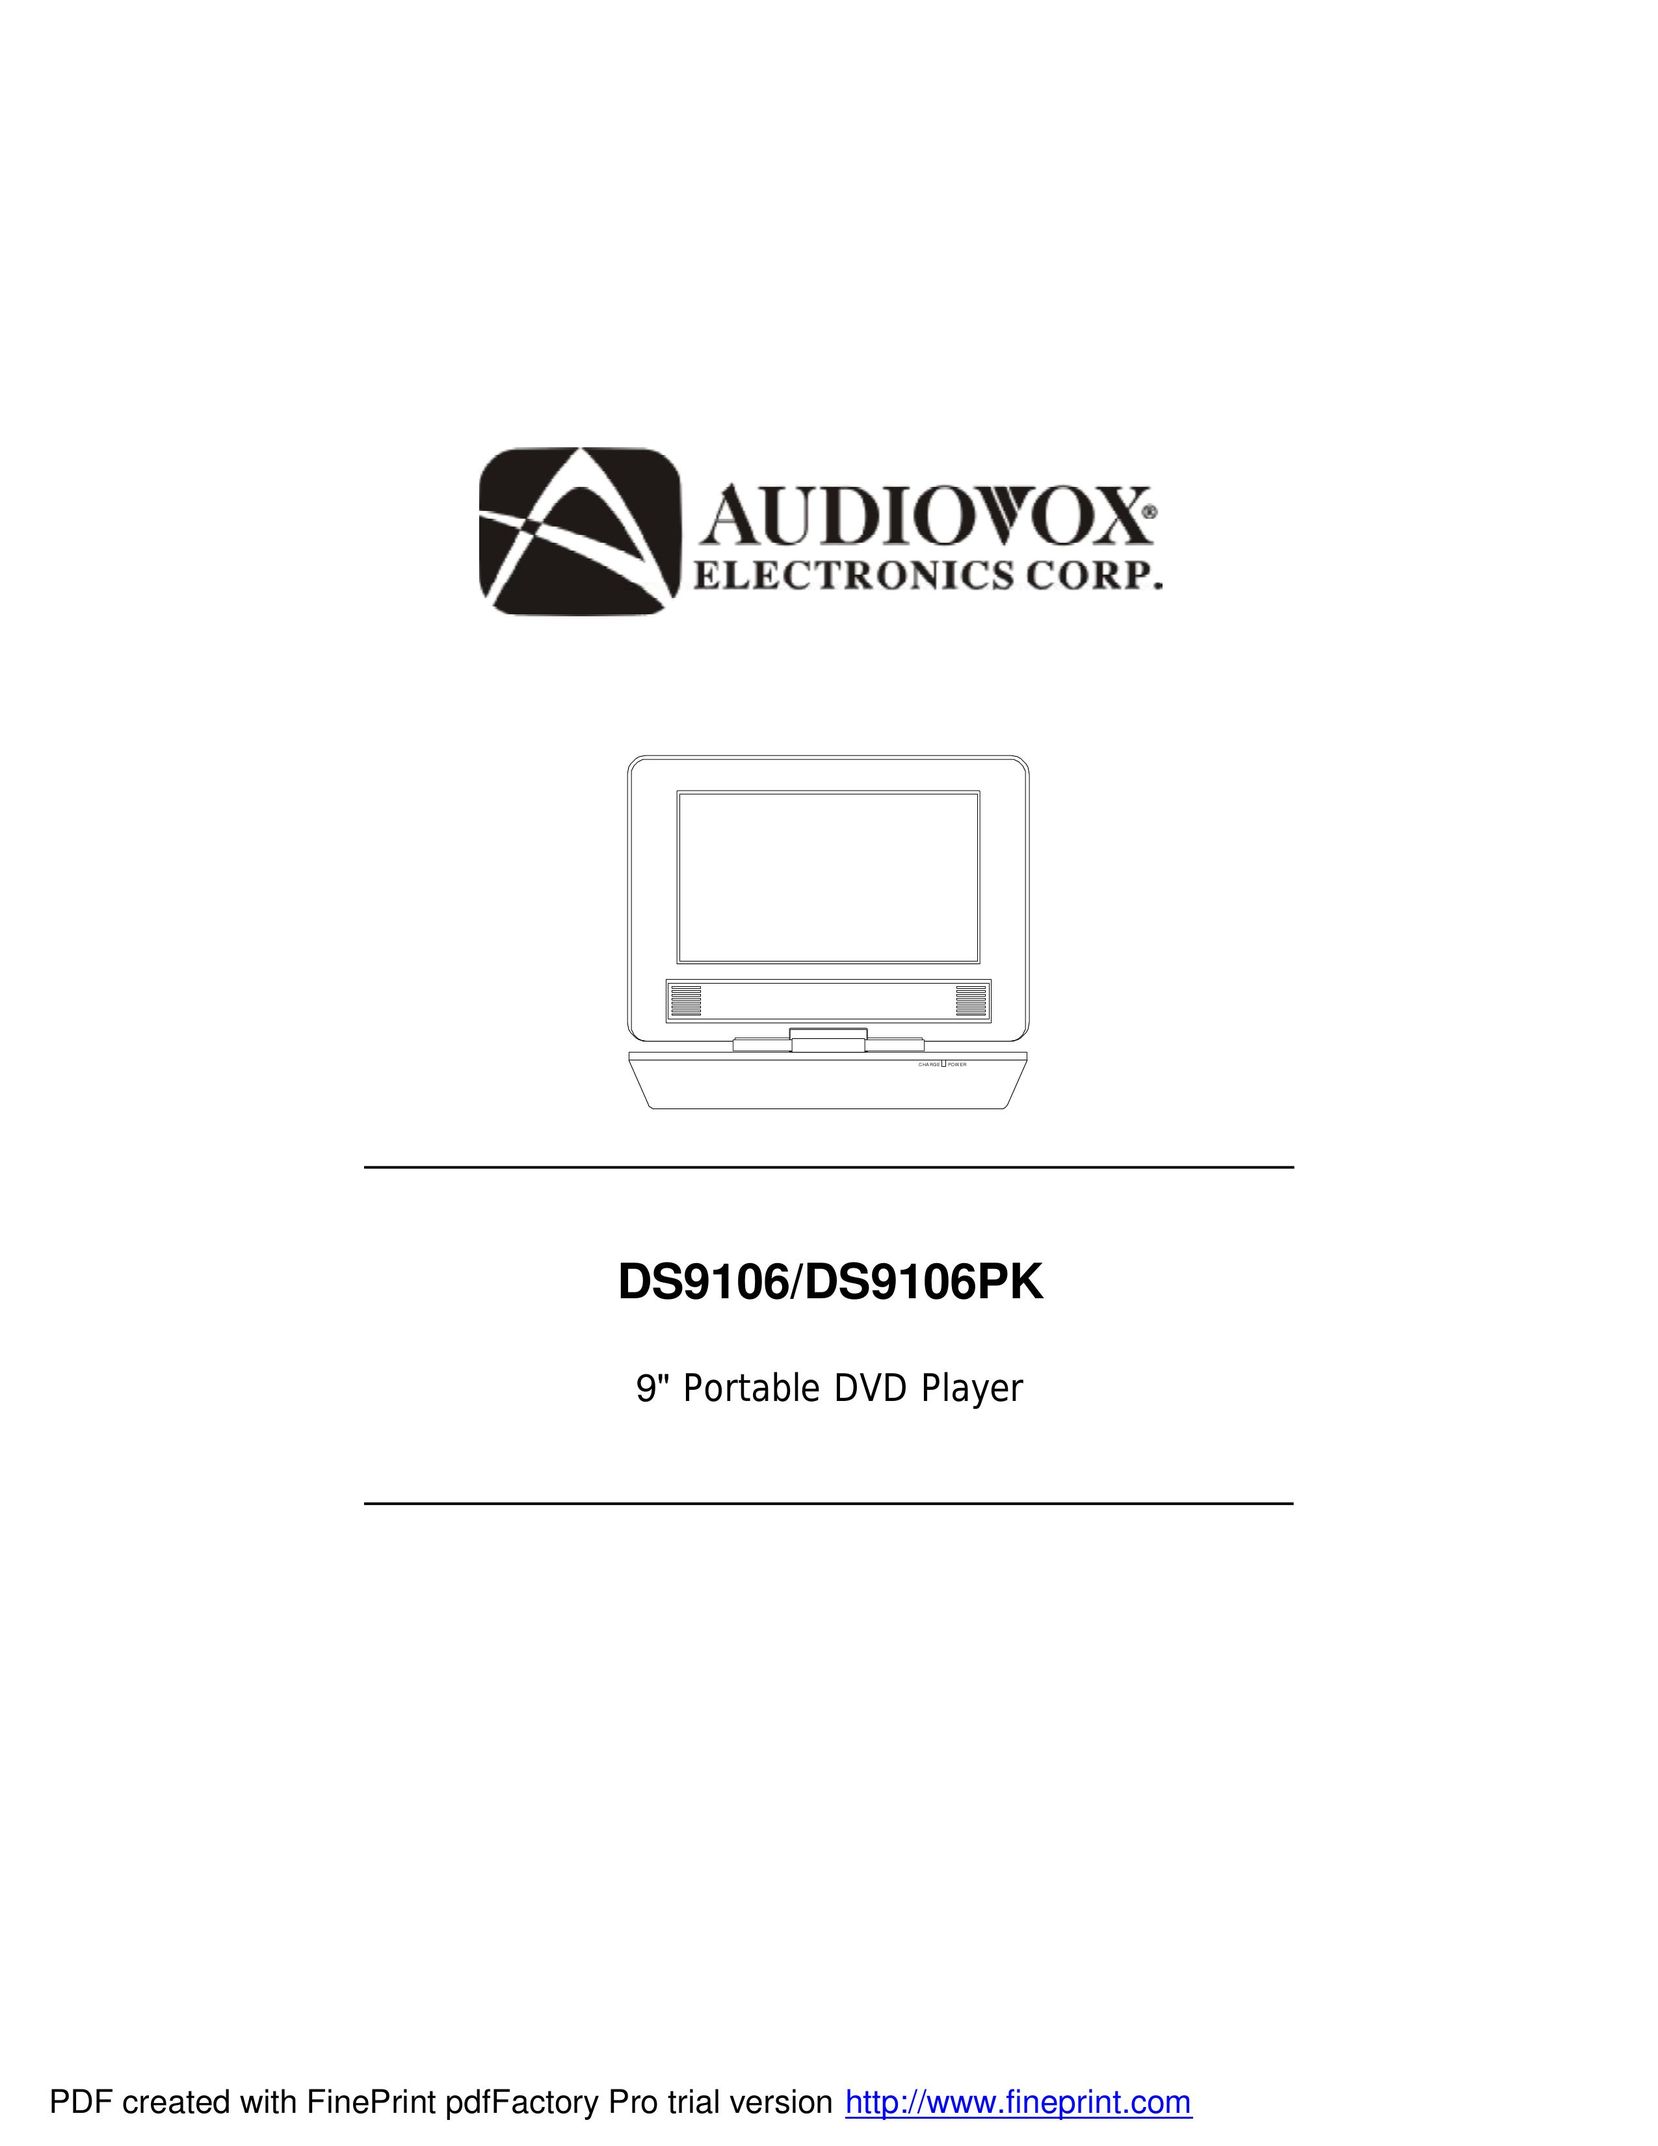 Audiovox DS9106 Portable DVD Player User Manual